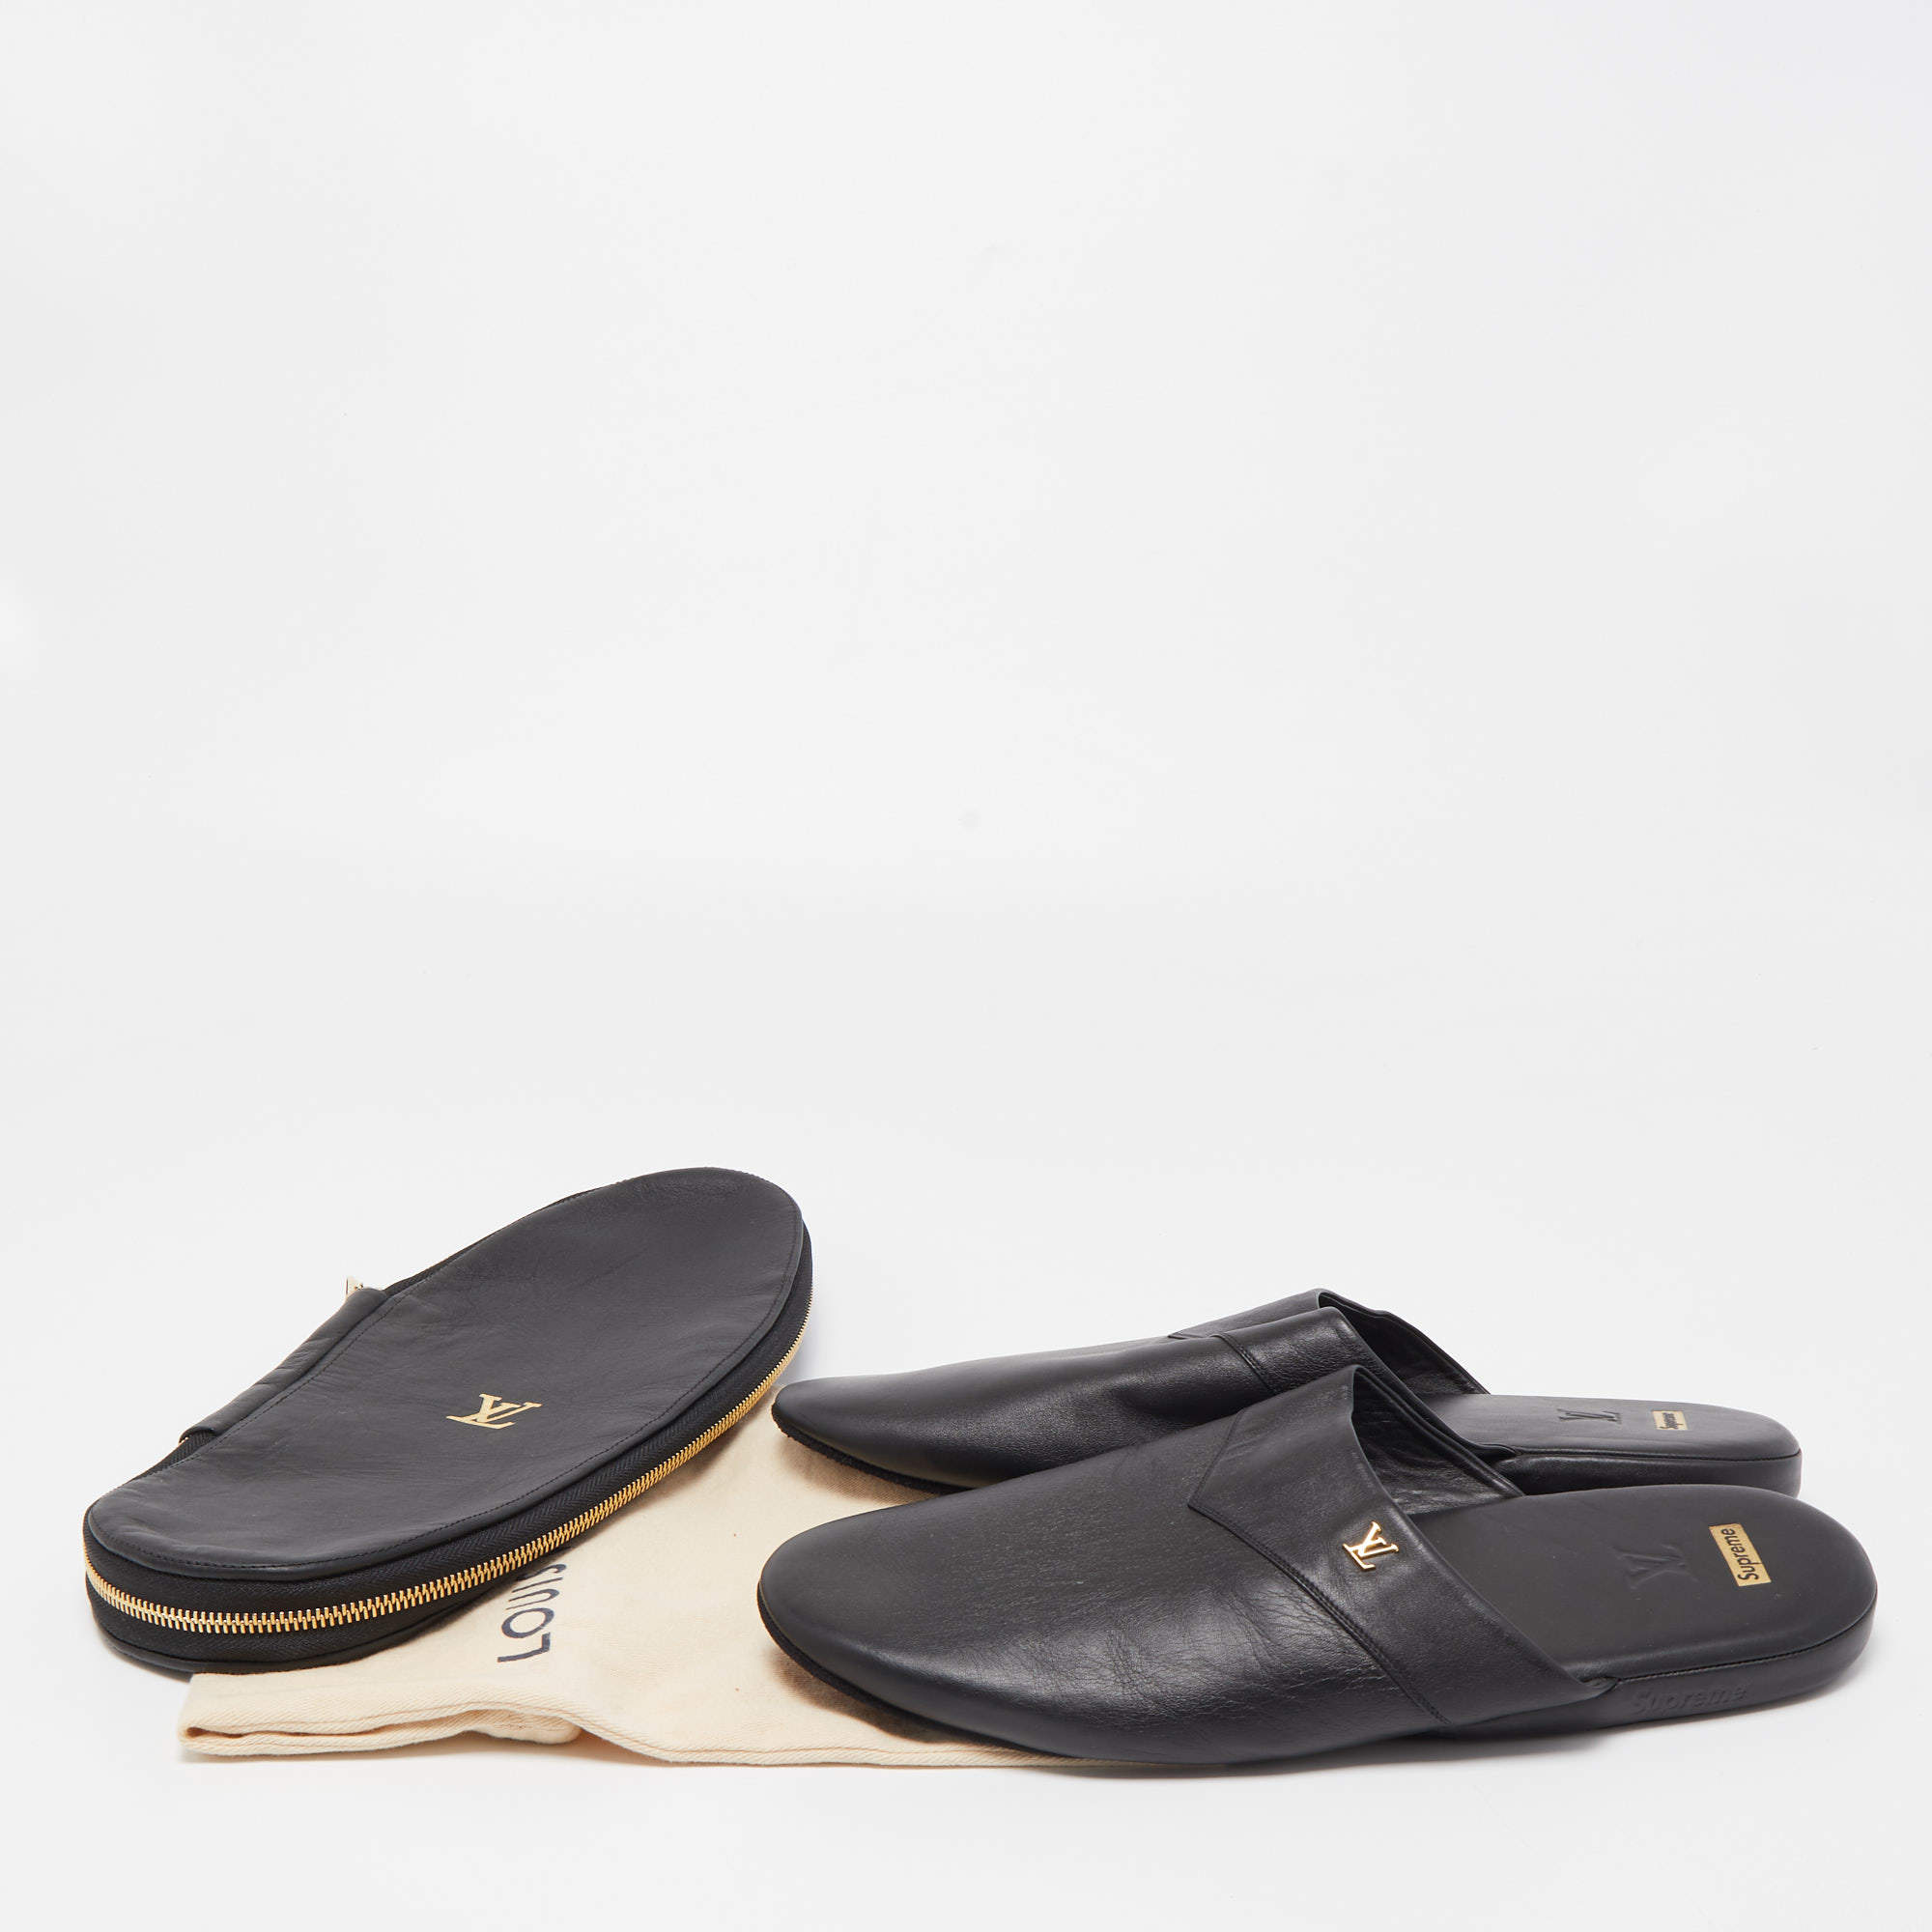 Louis Vuitton x Supreme Black Leather Slippers 7